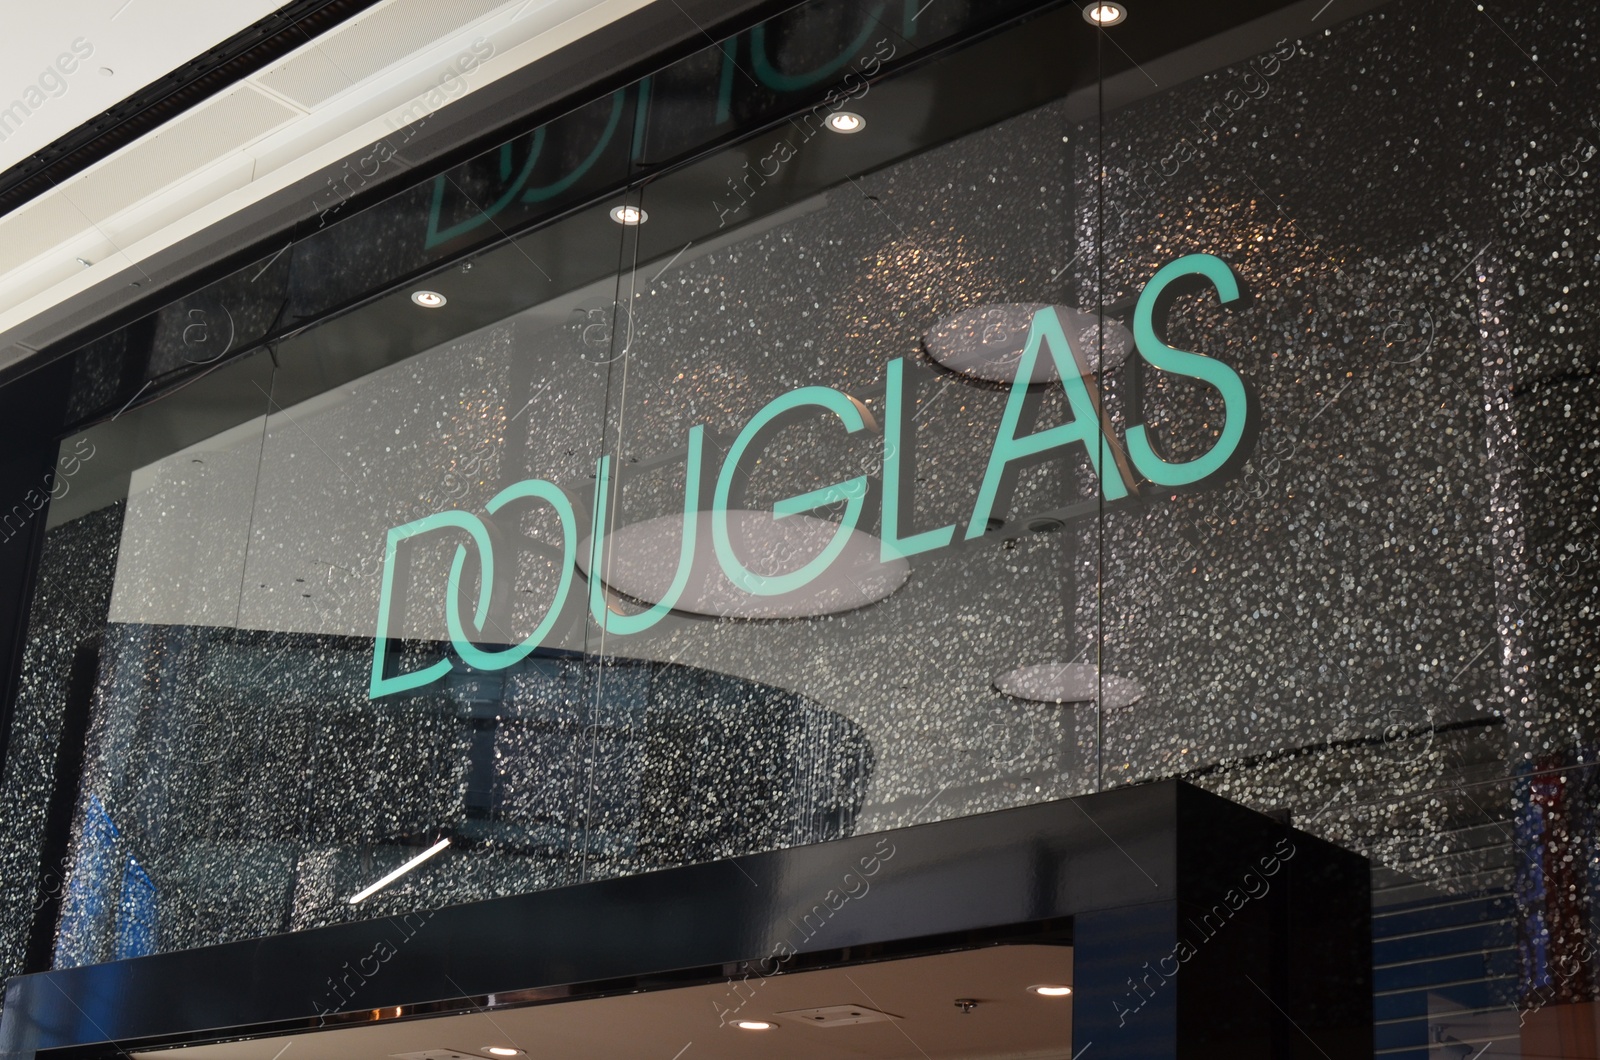 Photo of Utrecht, Netherlands July 02, 2022: Douglas cosmetic store in shopping mall